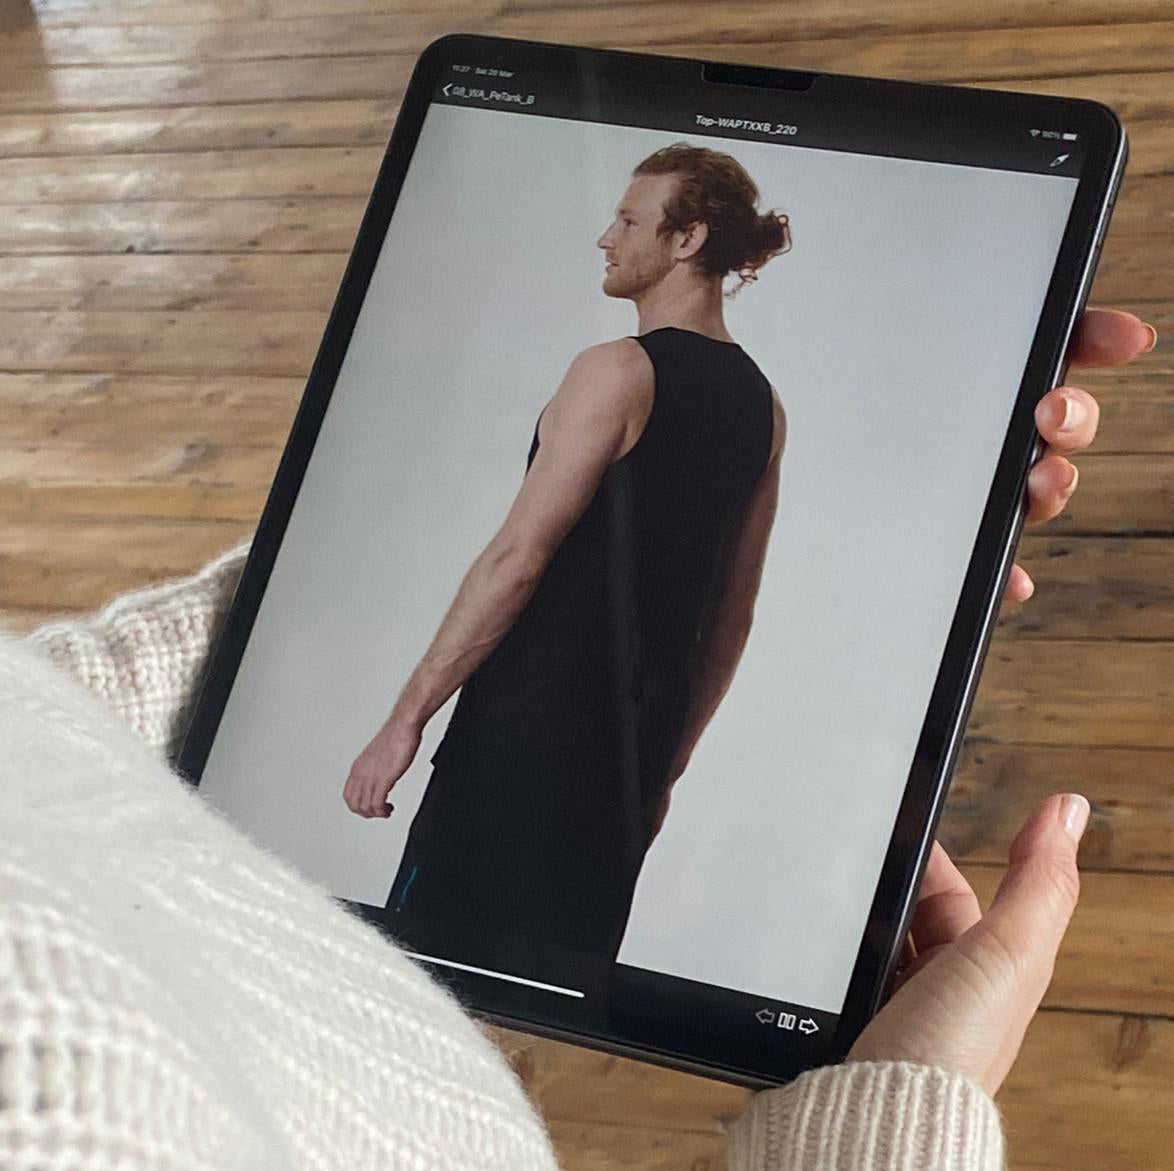 woman showing image of a man on an i-pad